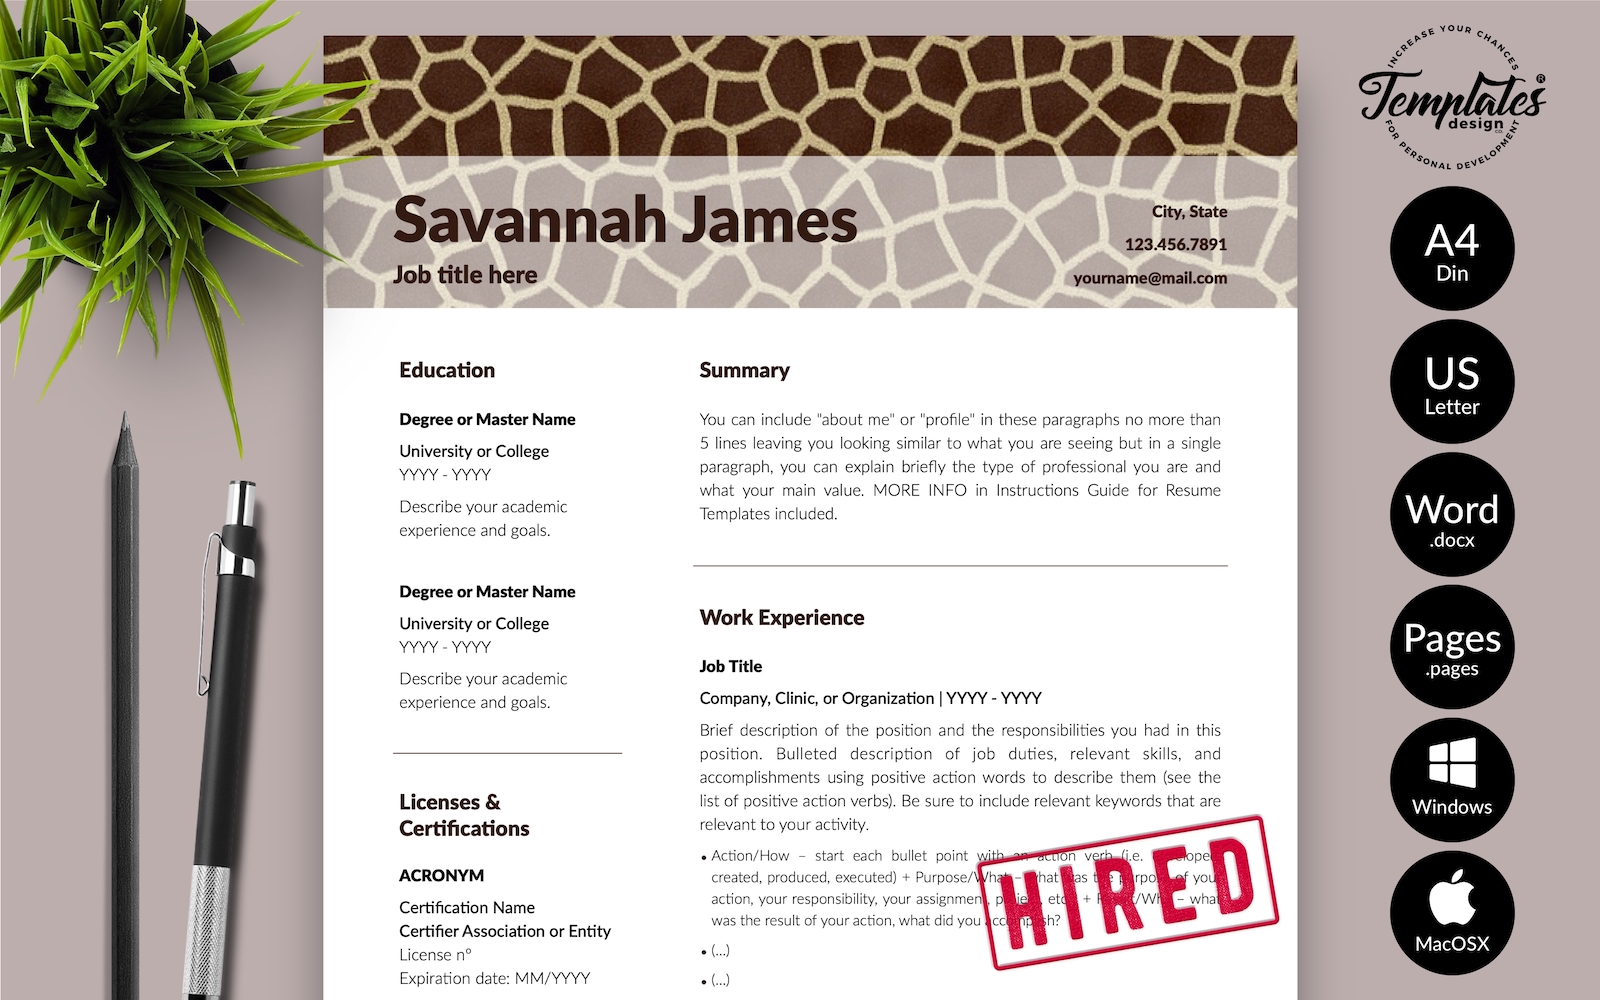 Savannah James -  Zookeeper Resume Template with Cover Letter for Microsoft Word & iWork Pages